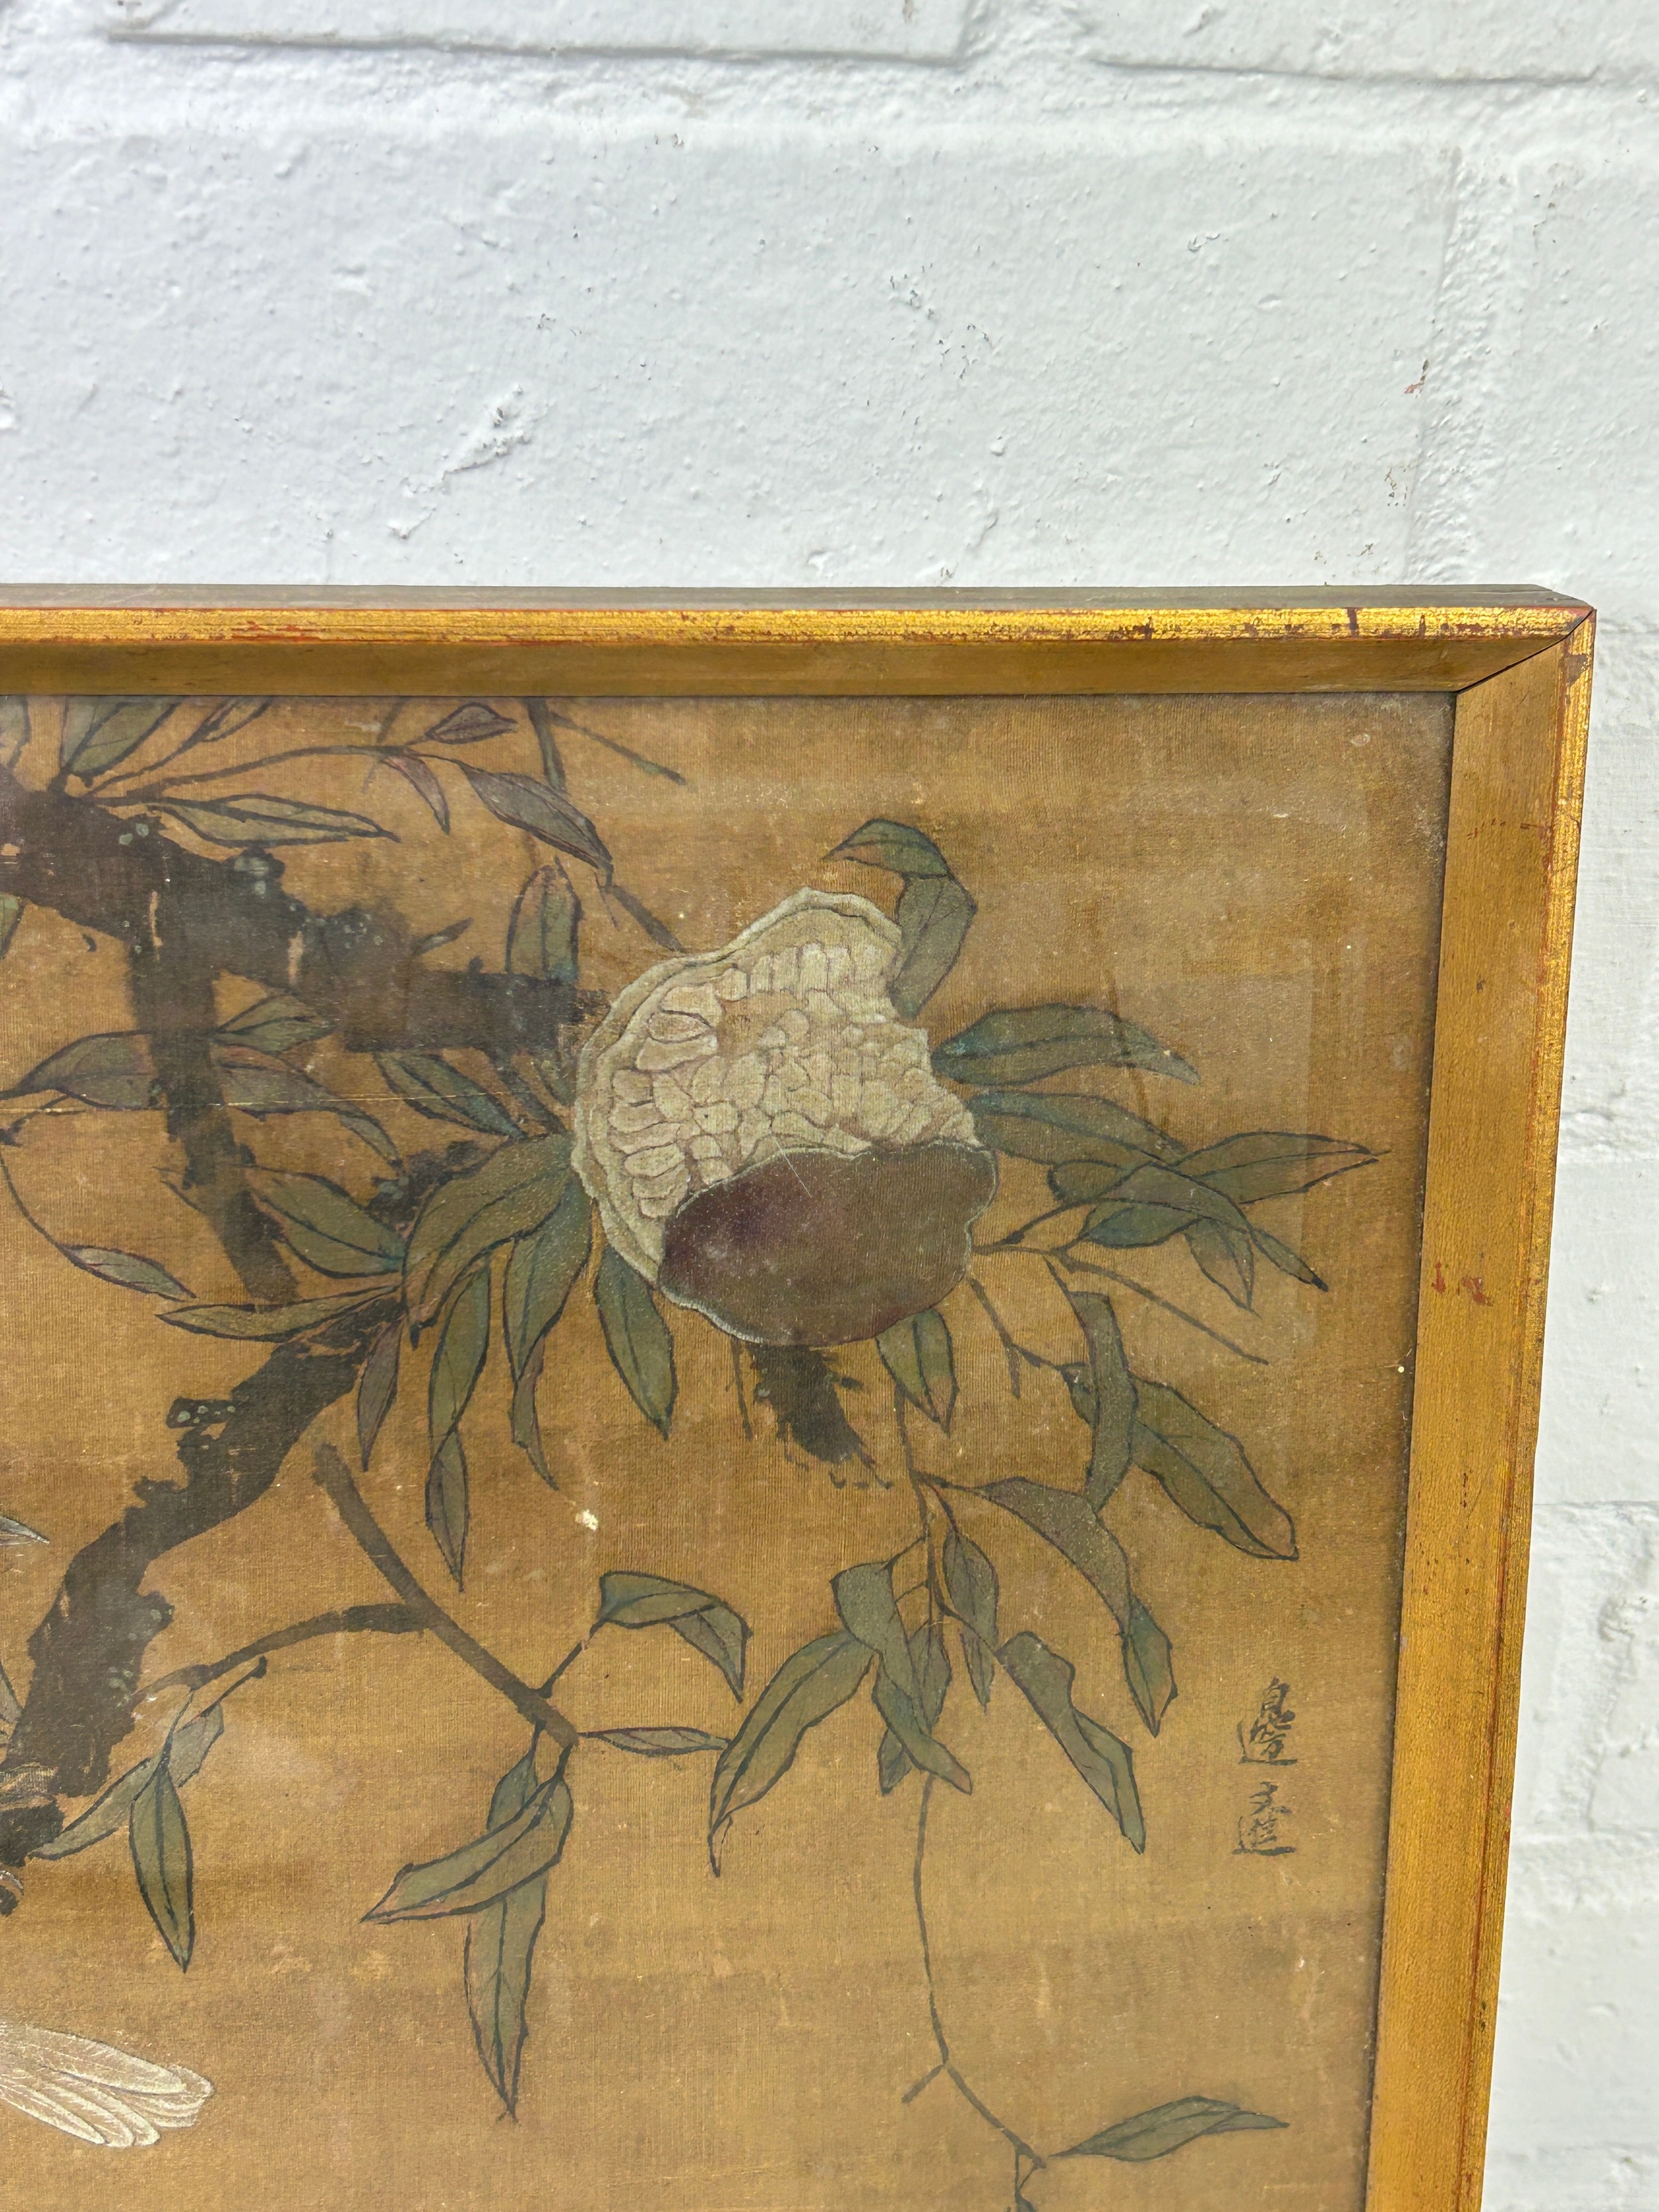 AFTER BIAN WEN JIN (MING DYNASTY ACTIVE 15TH CENTURY): A CHINESE PAINTING ON SILK DEPICTING A BIRD - Image 5 of 7